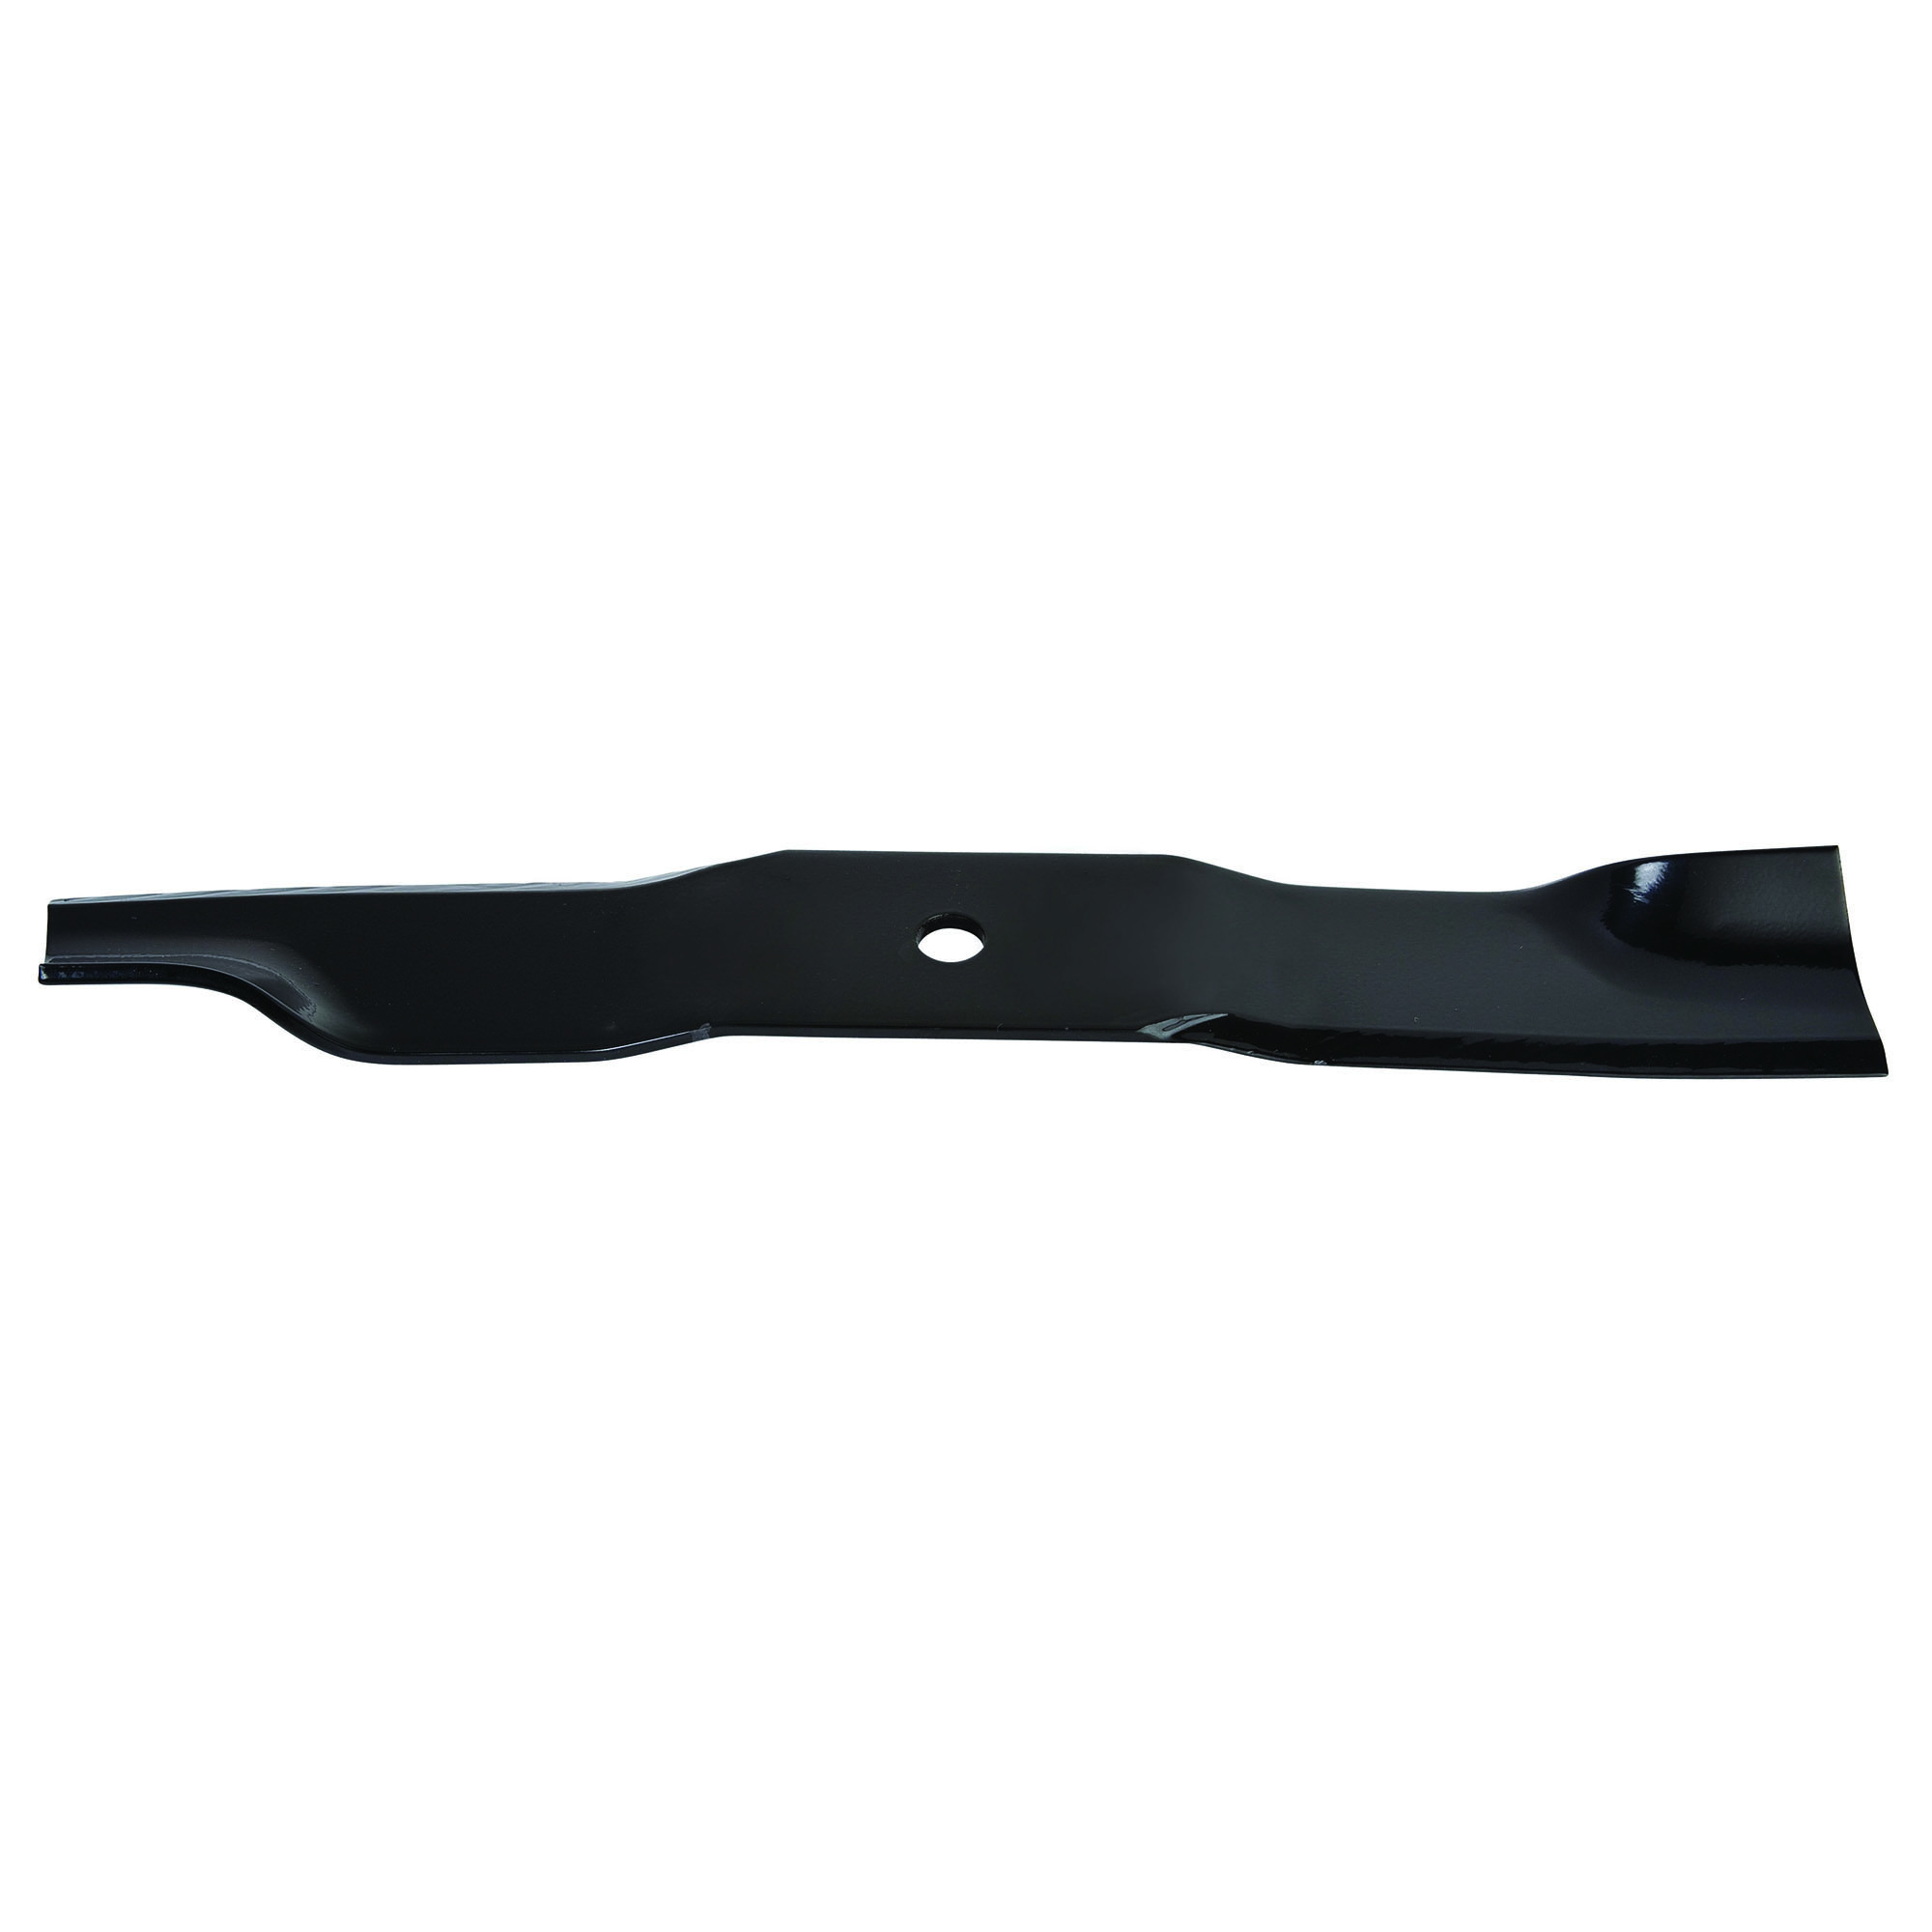 Oregon, Replacement Lawn Mower Blade, Length 18 in, Model 793-010